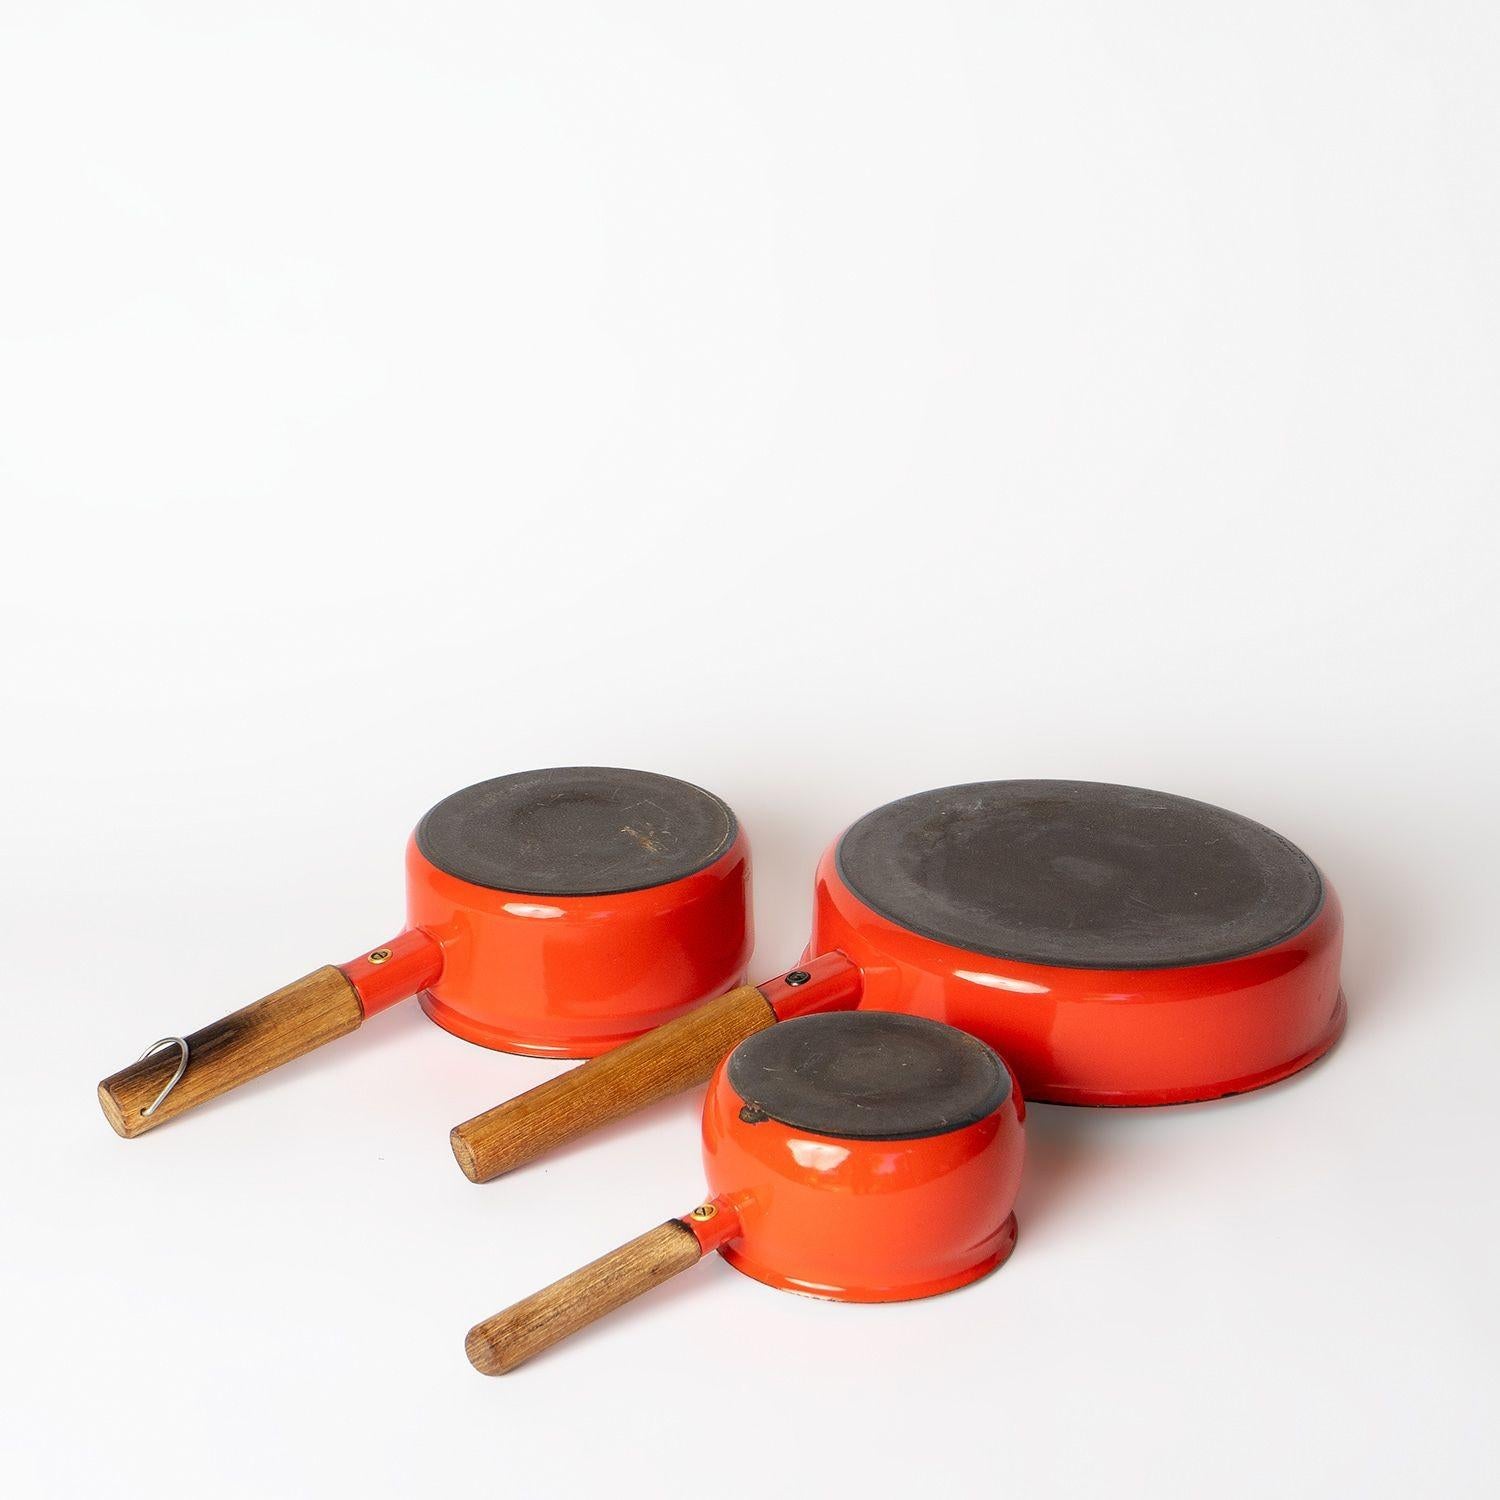 Set of Vintage Enamel Saucepans by Seppo Mallat for Finel Arabia Finland, 1960s For Sale 2